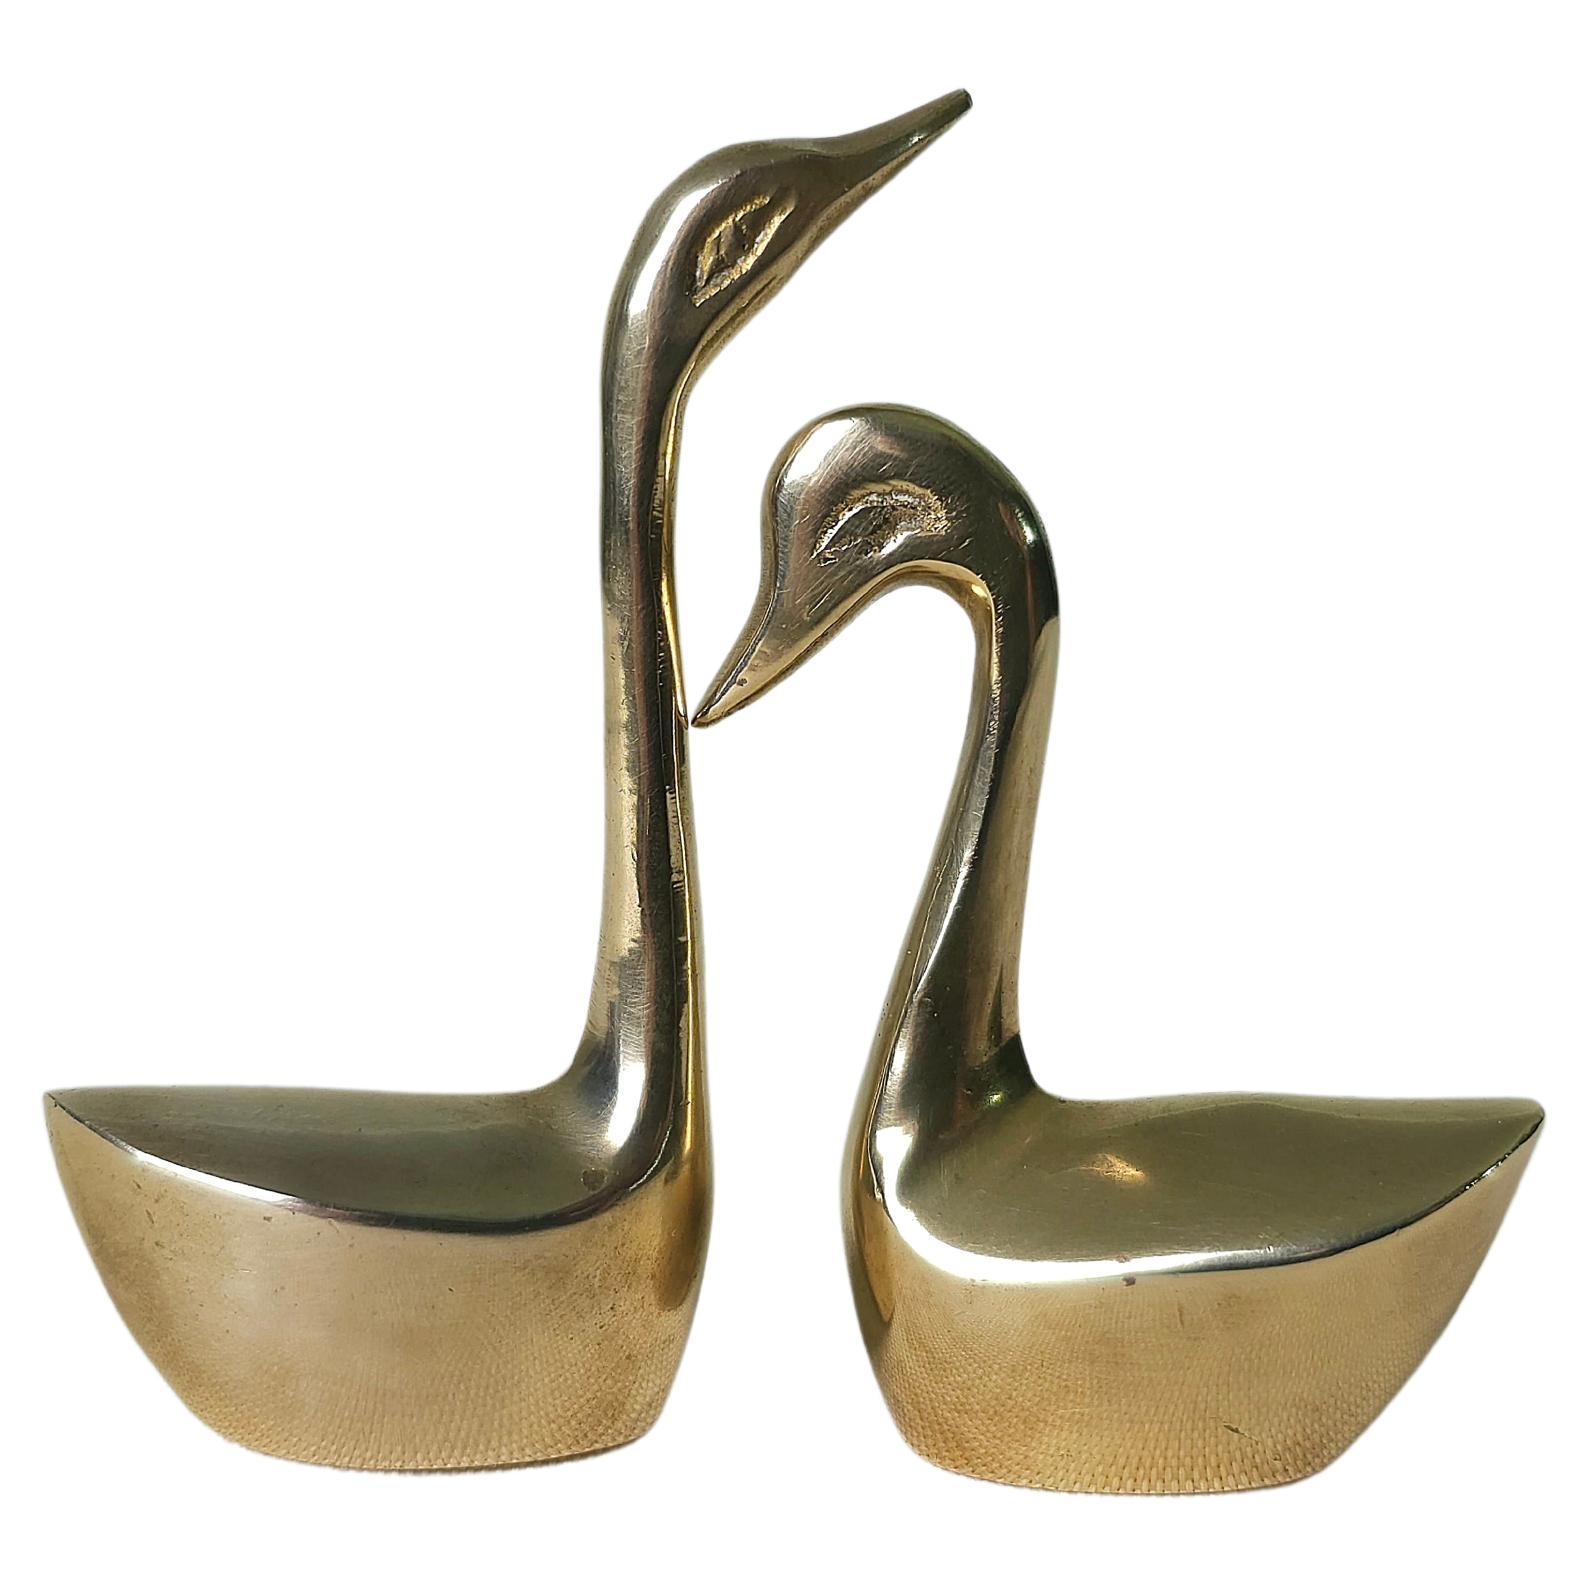 Two Brass Decorative Objects Midcentury Modern Italia 1960/70s For Sale